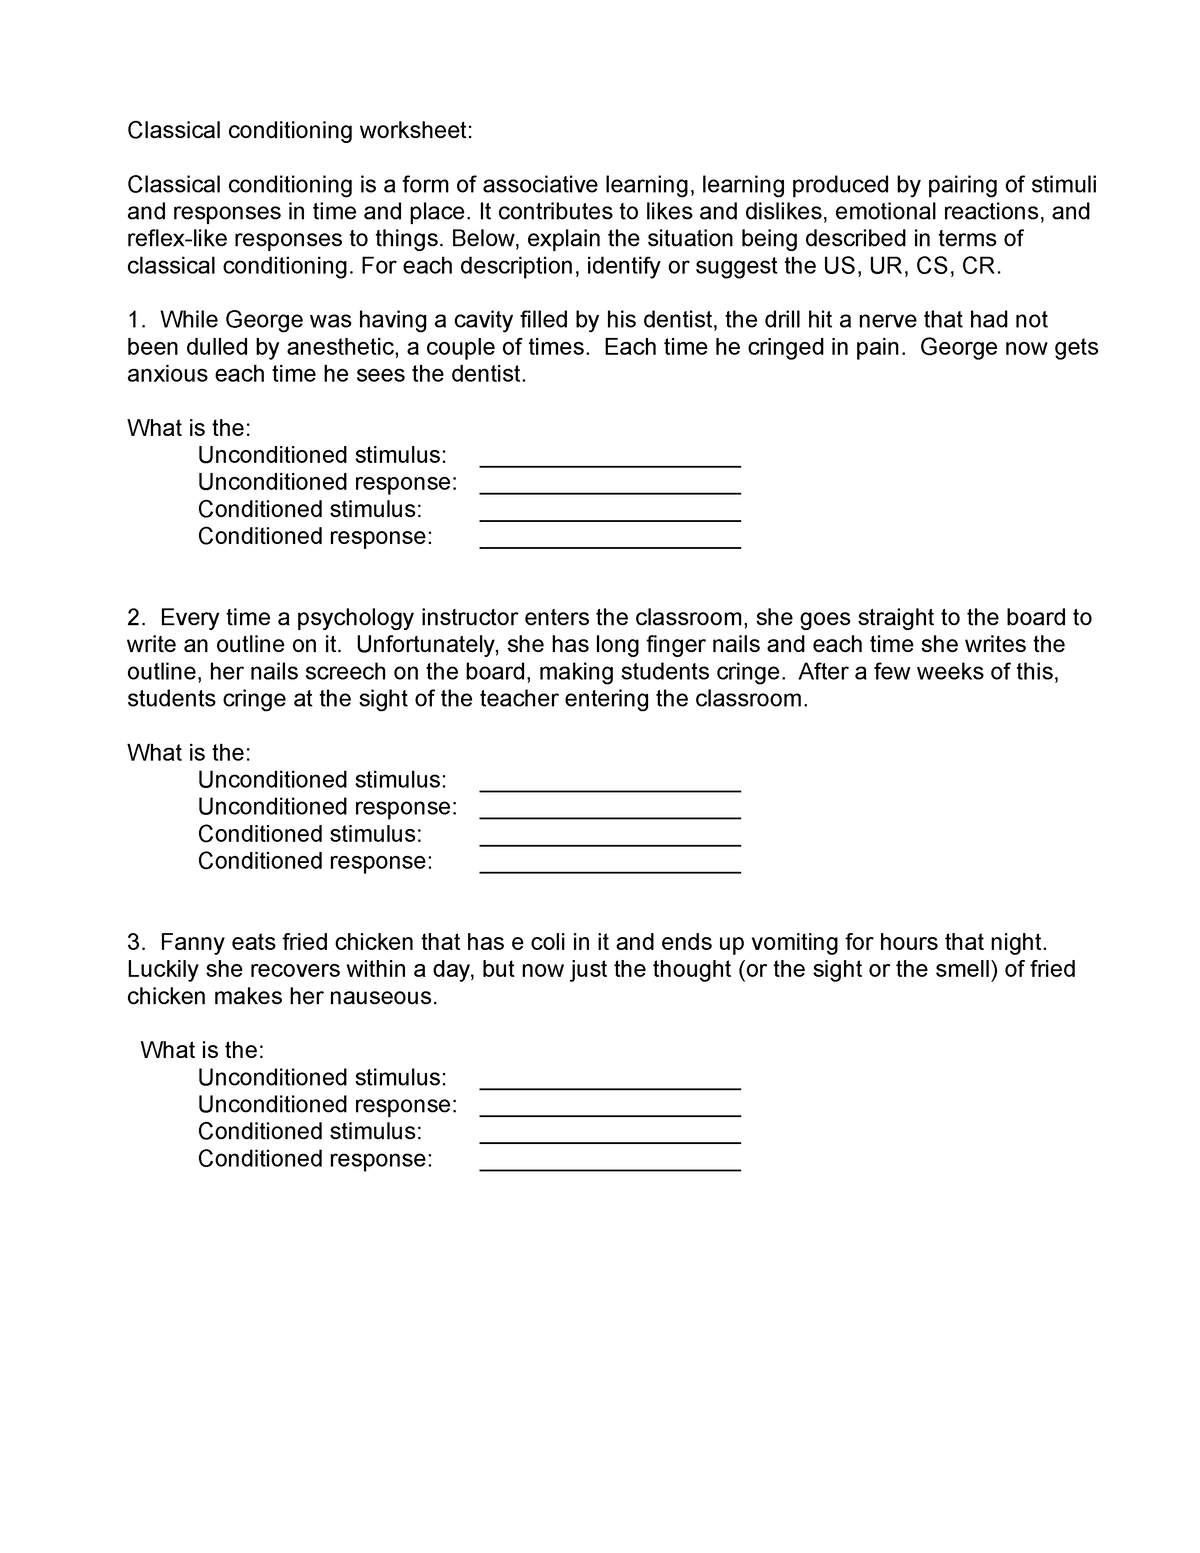 classical-conditioning-worksheet-classical-conditioning-worksheet-classical-conditioning-is-a